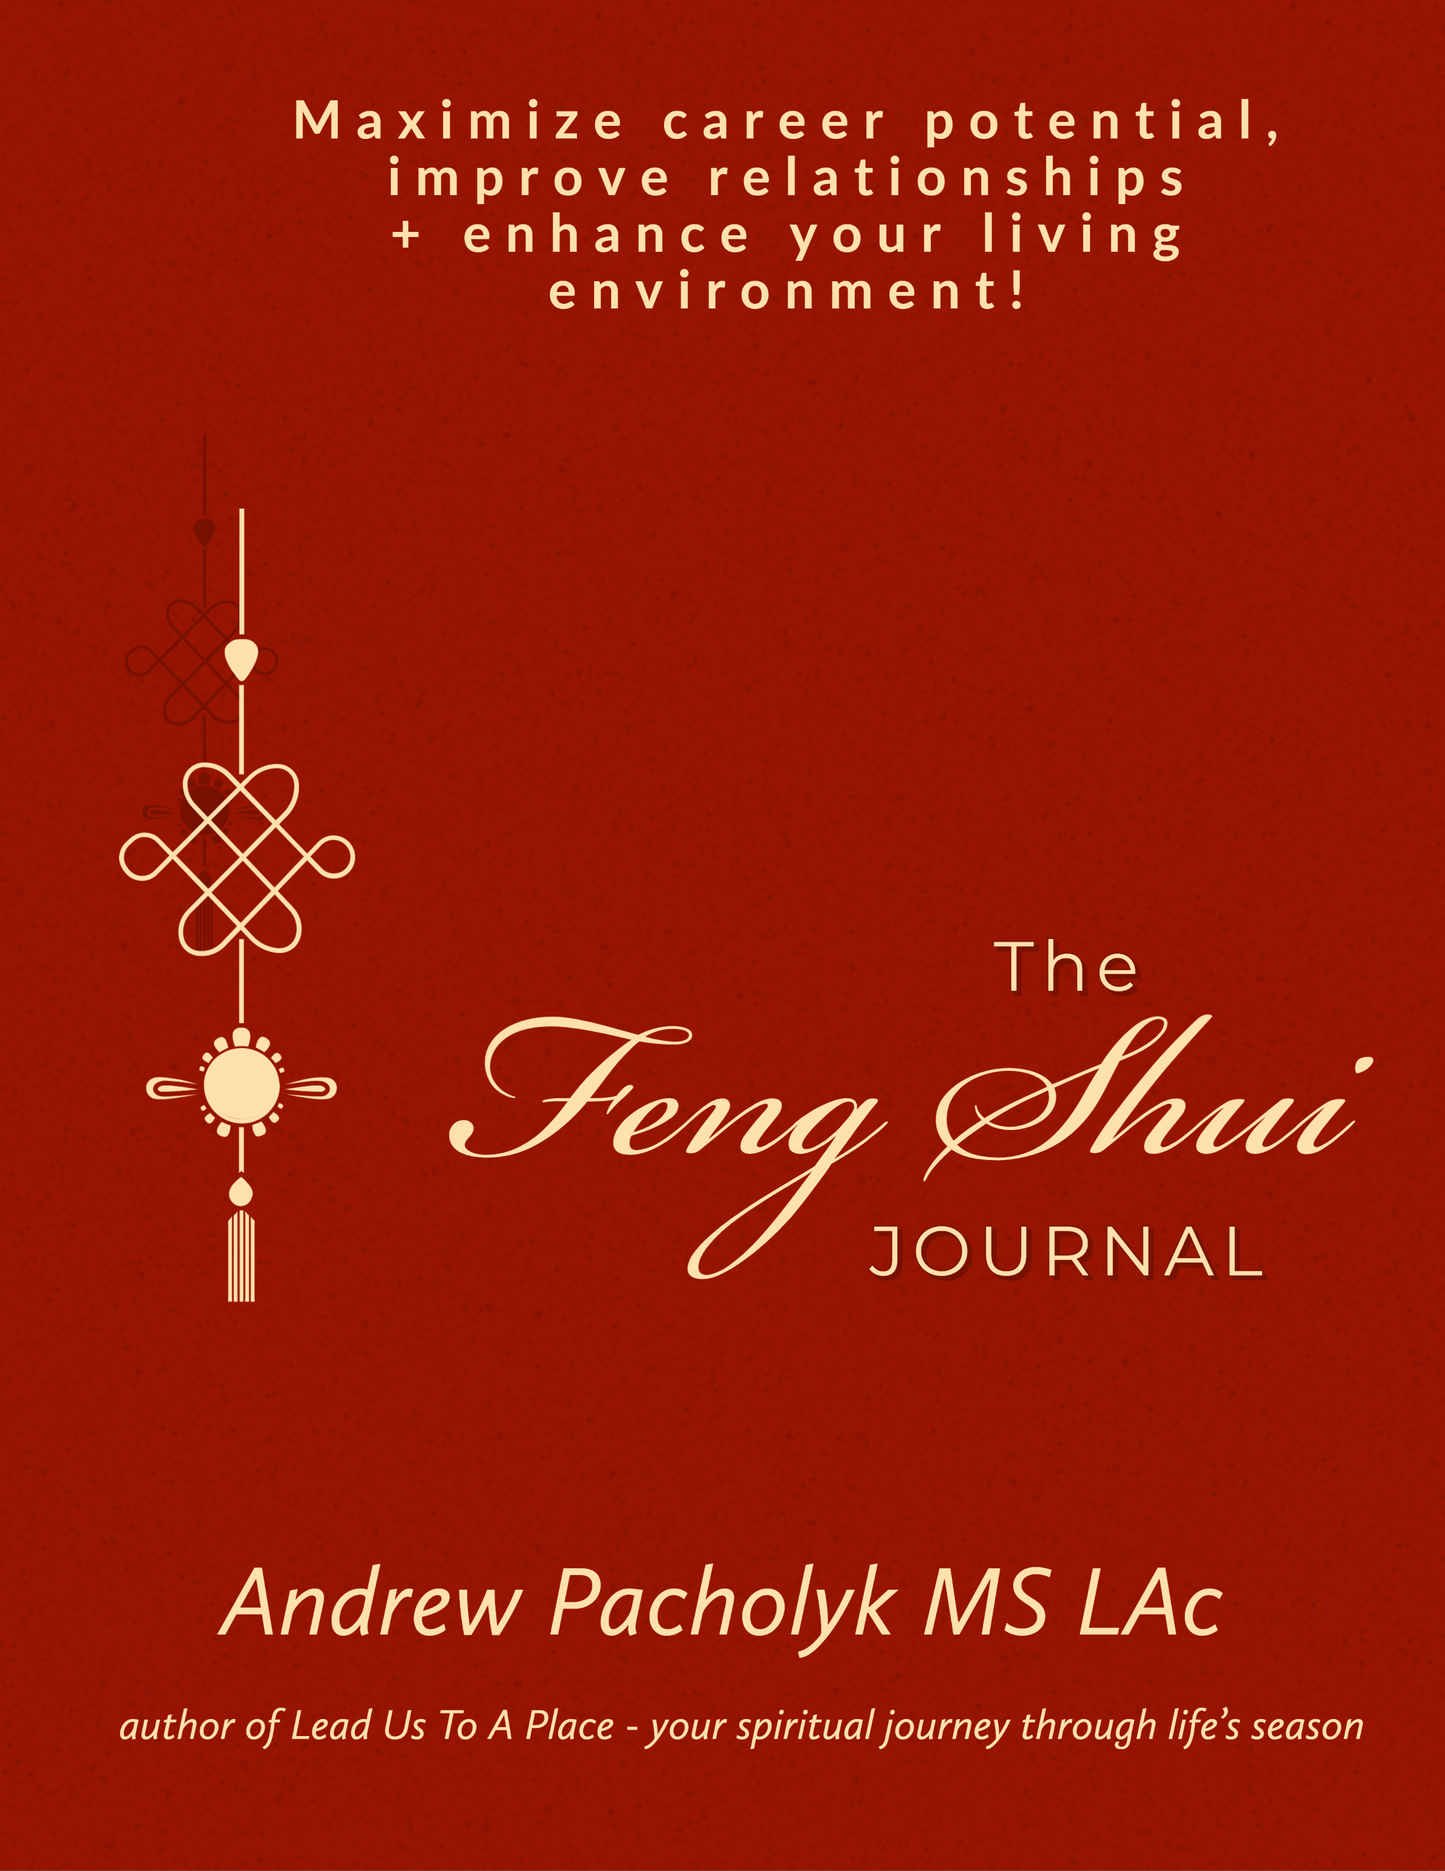 Feng Shui Certification and Journal